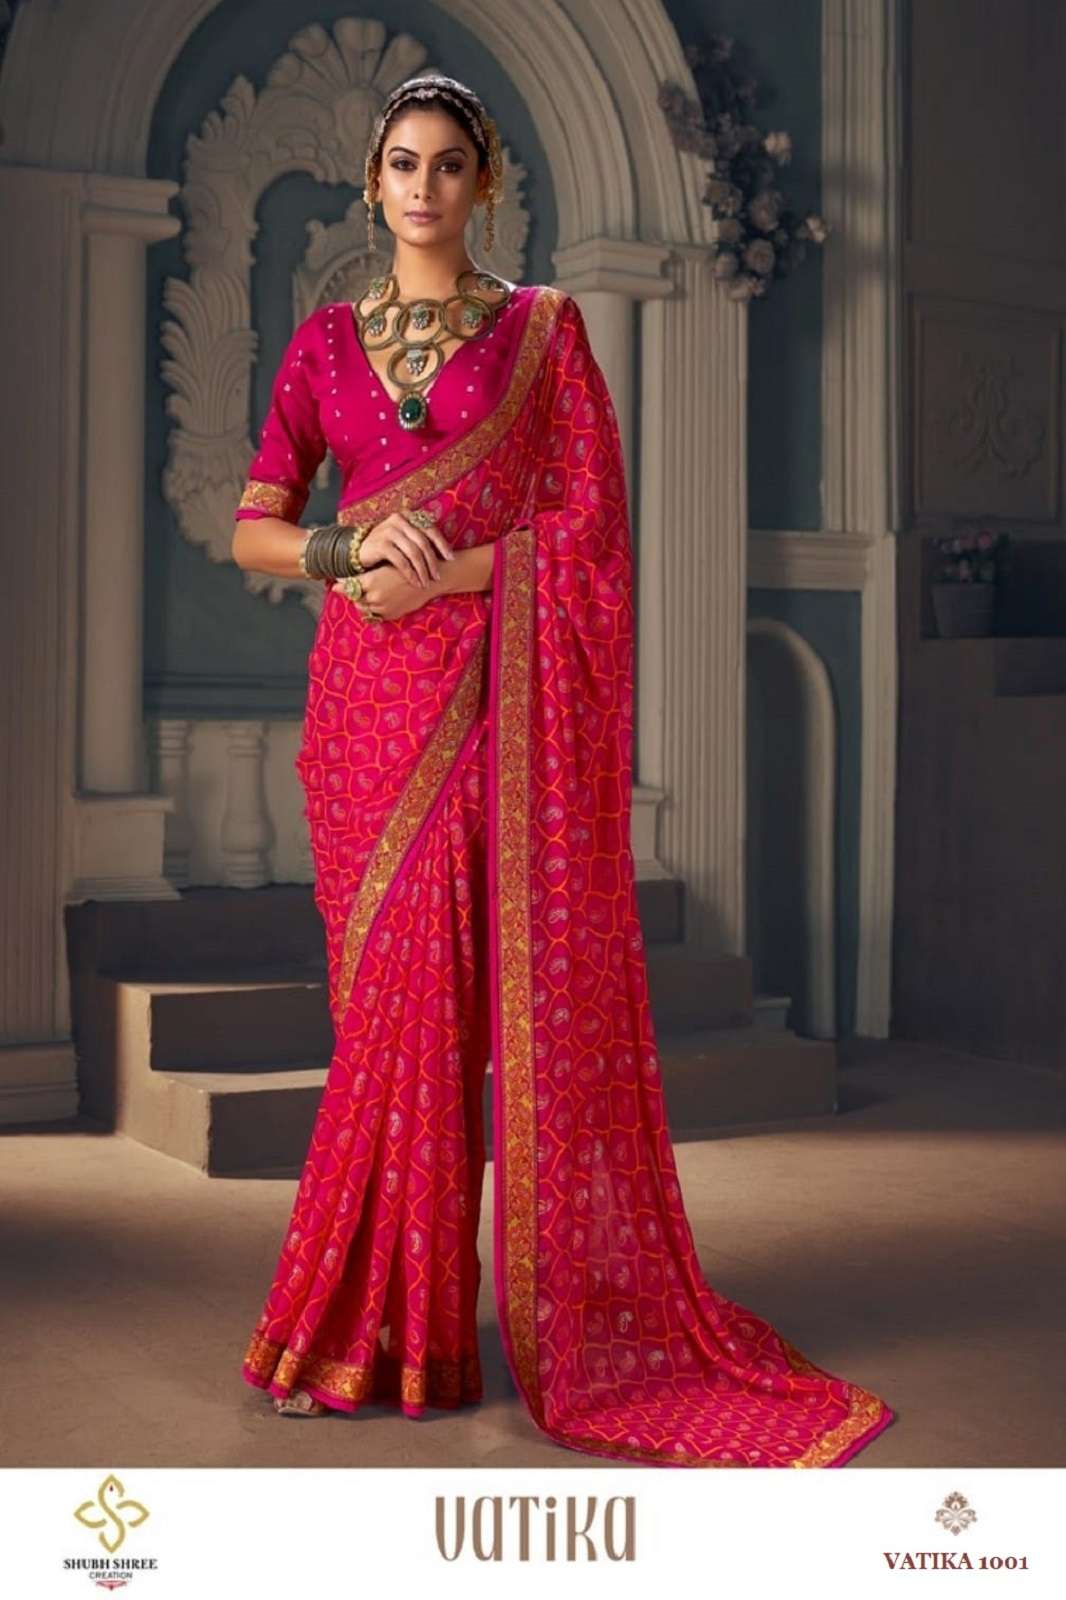 Shubh Shree Vatika Ethnic Wear Traditional Georgette Saree Collection